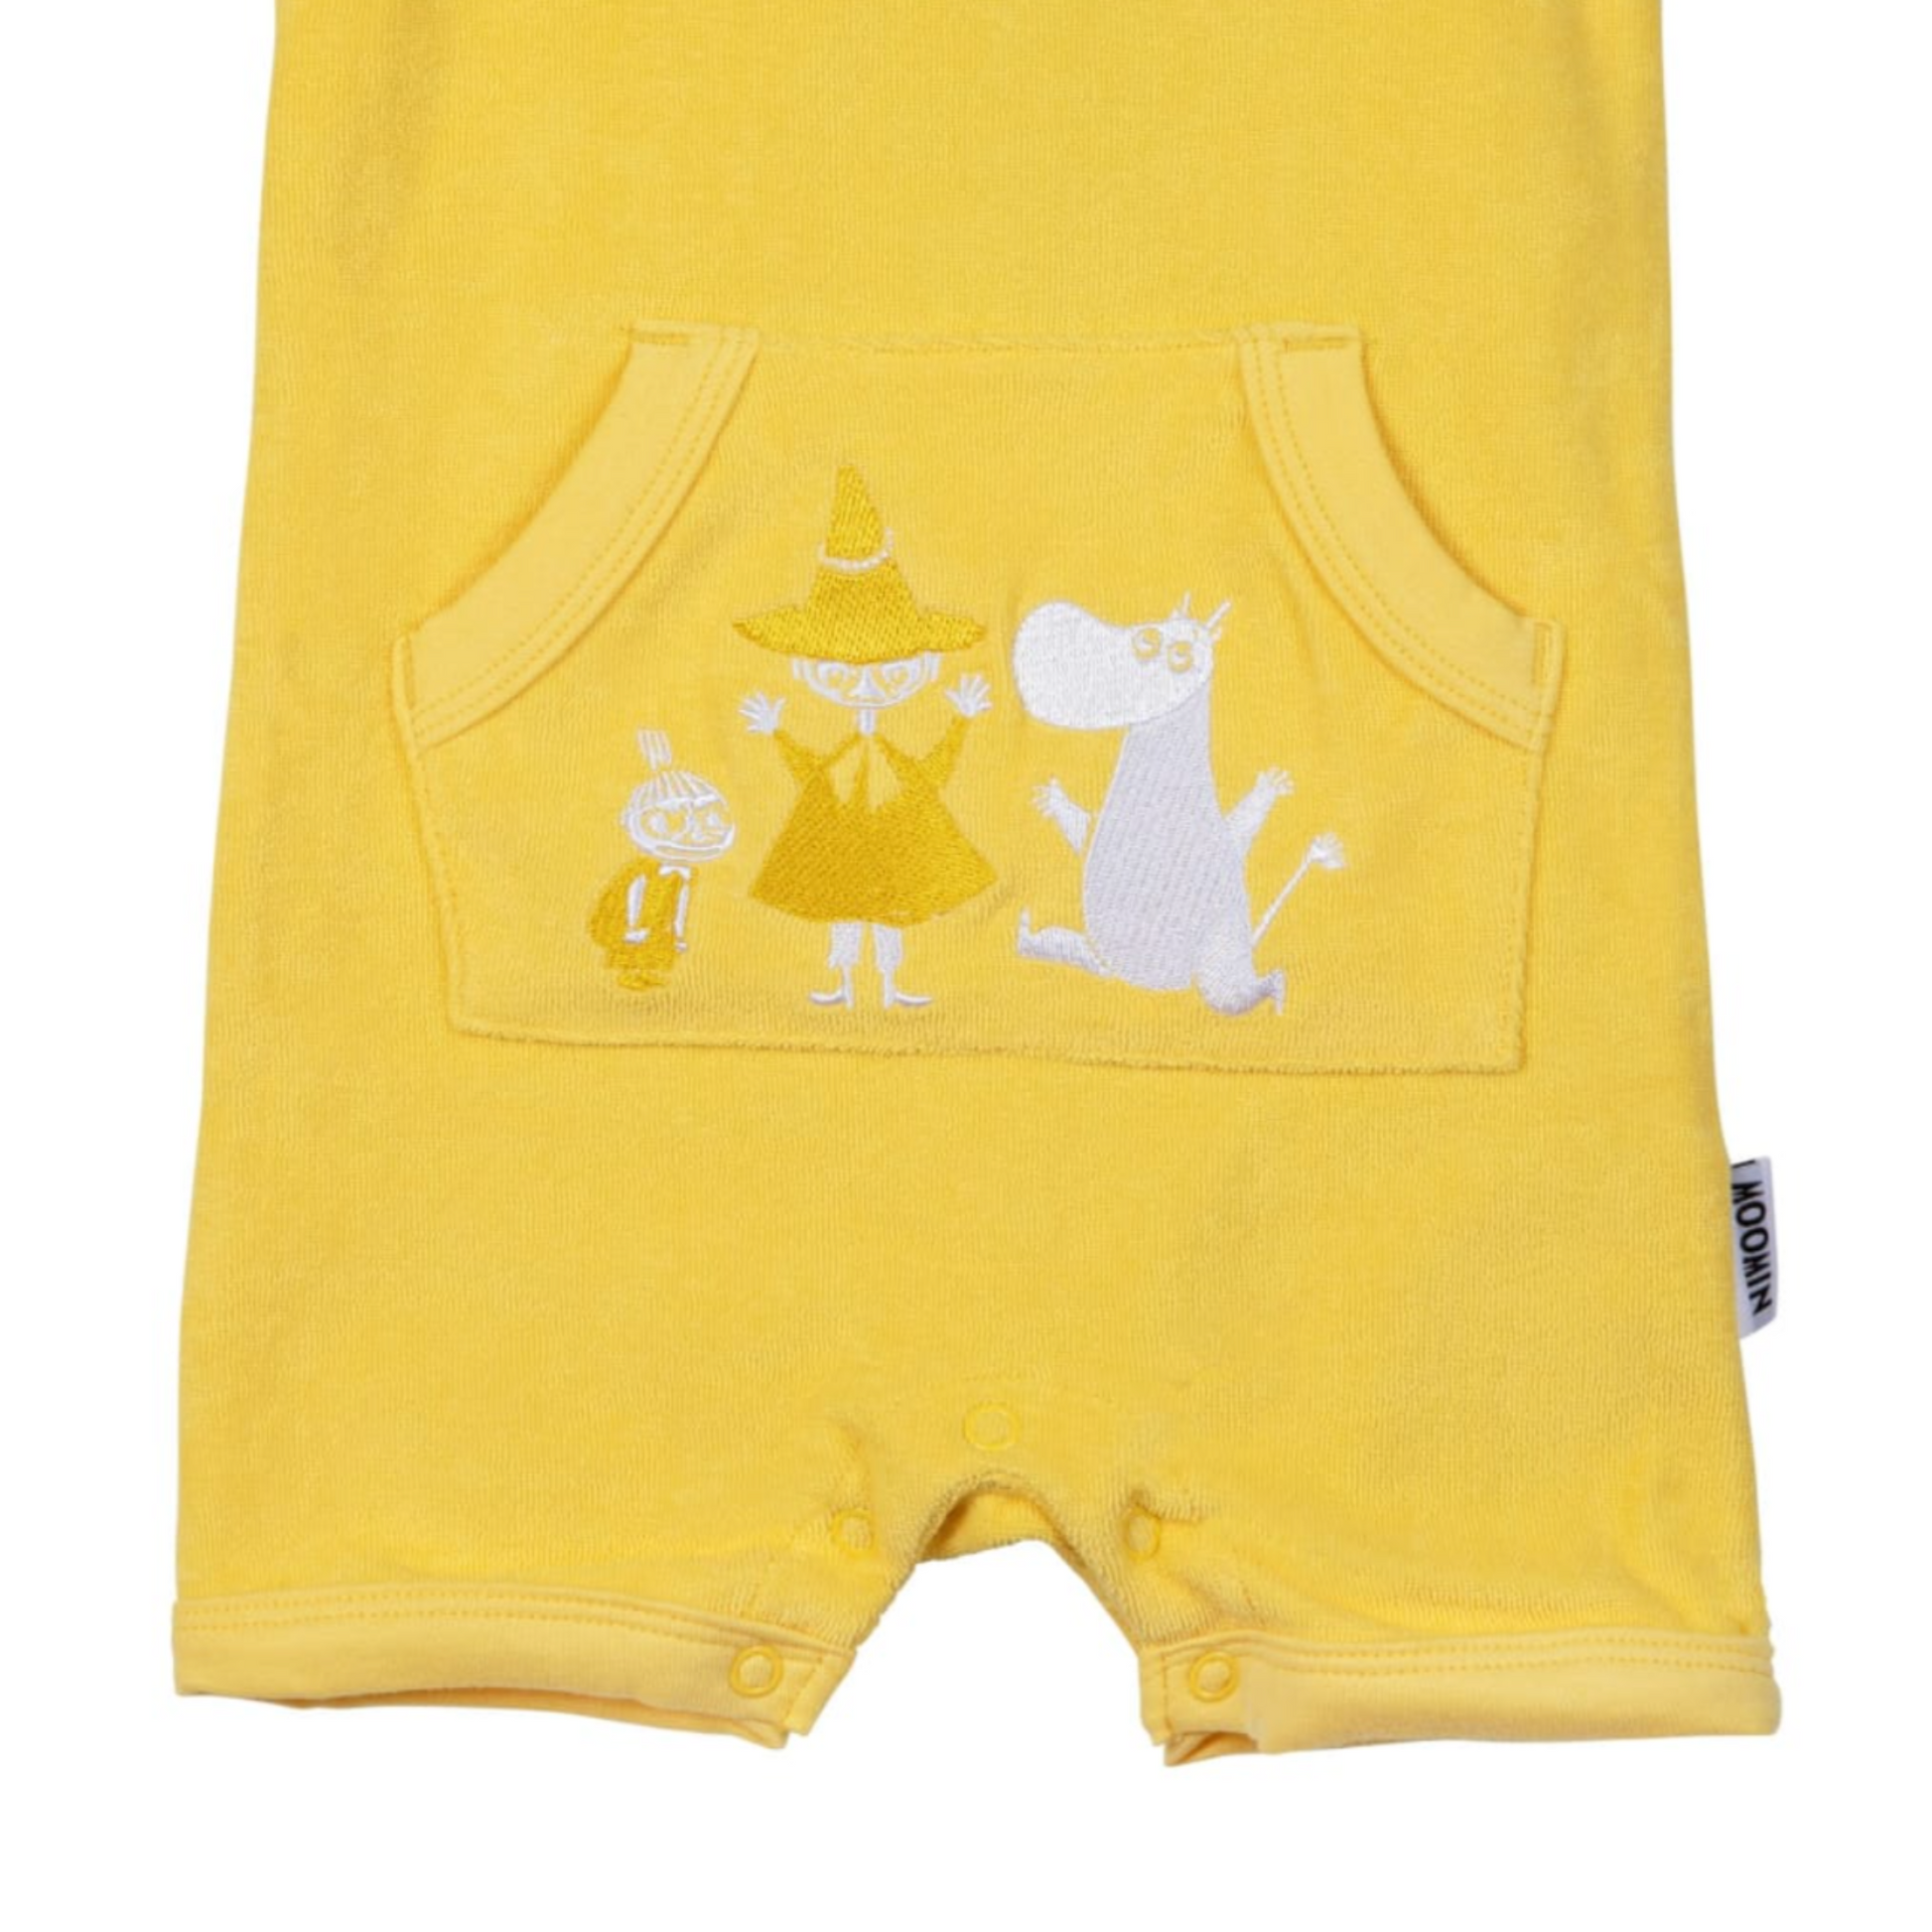 Moomin Baby Playsuit Terry, Yellow (8616845476127)